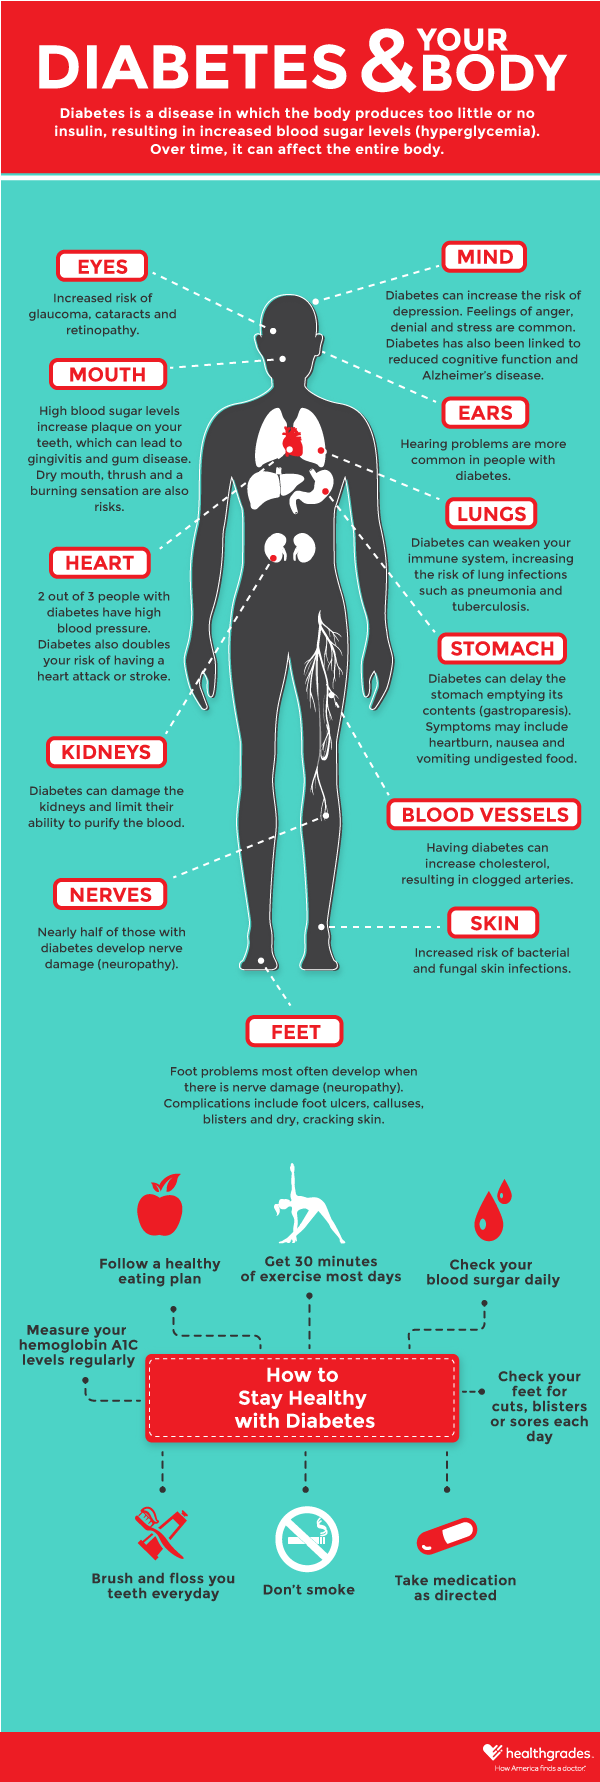 Diabetes and Your Body Infographic Image